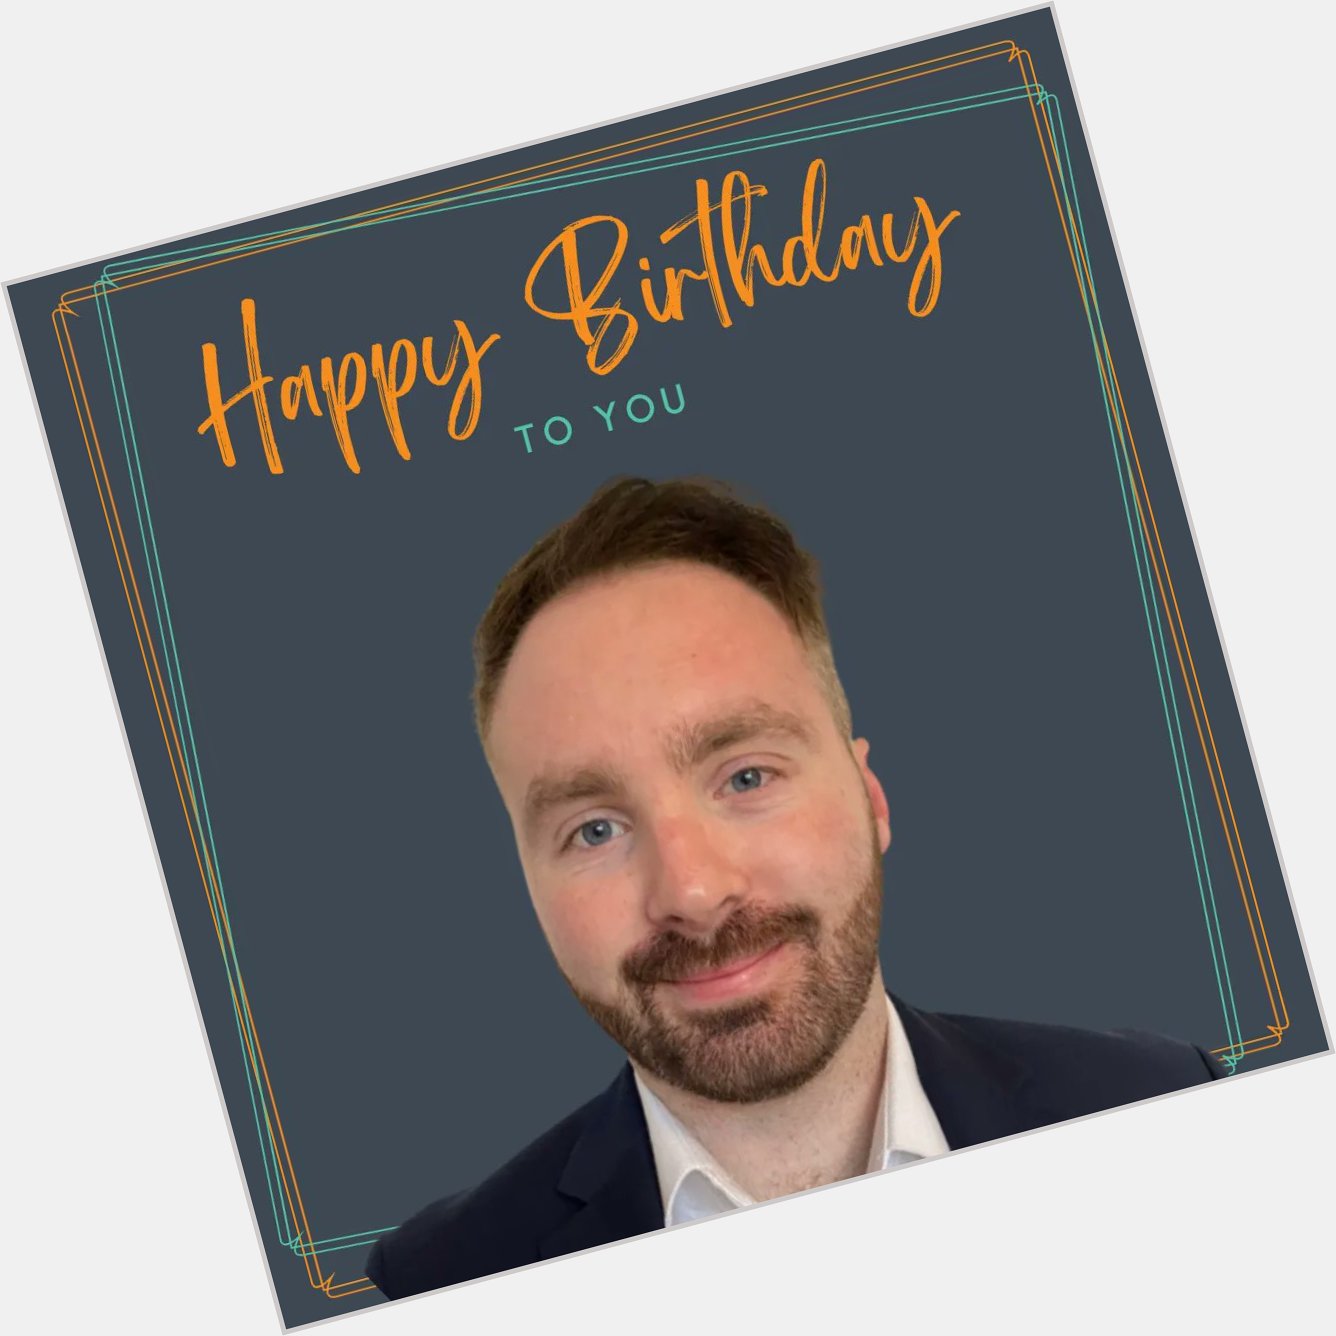  Many Happy Returns to our Head of Operations, Dean Smith, who is celebrating his birthday this week 